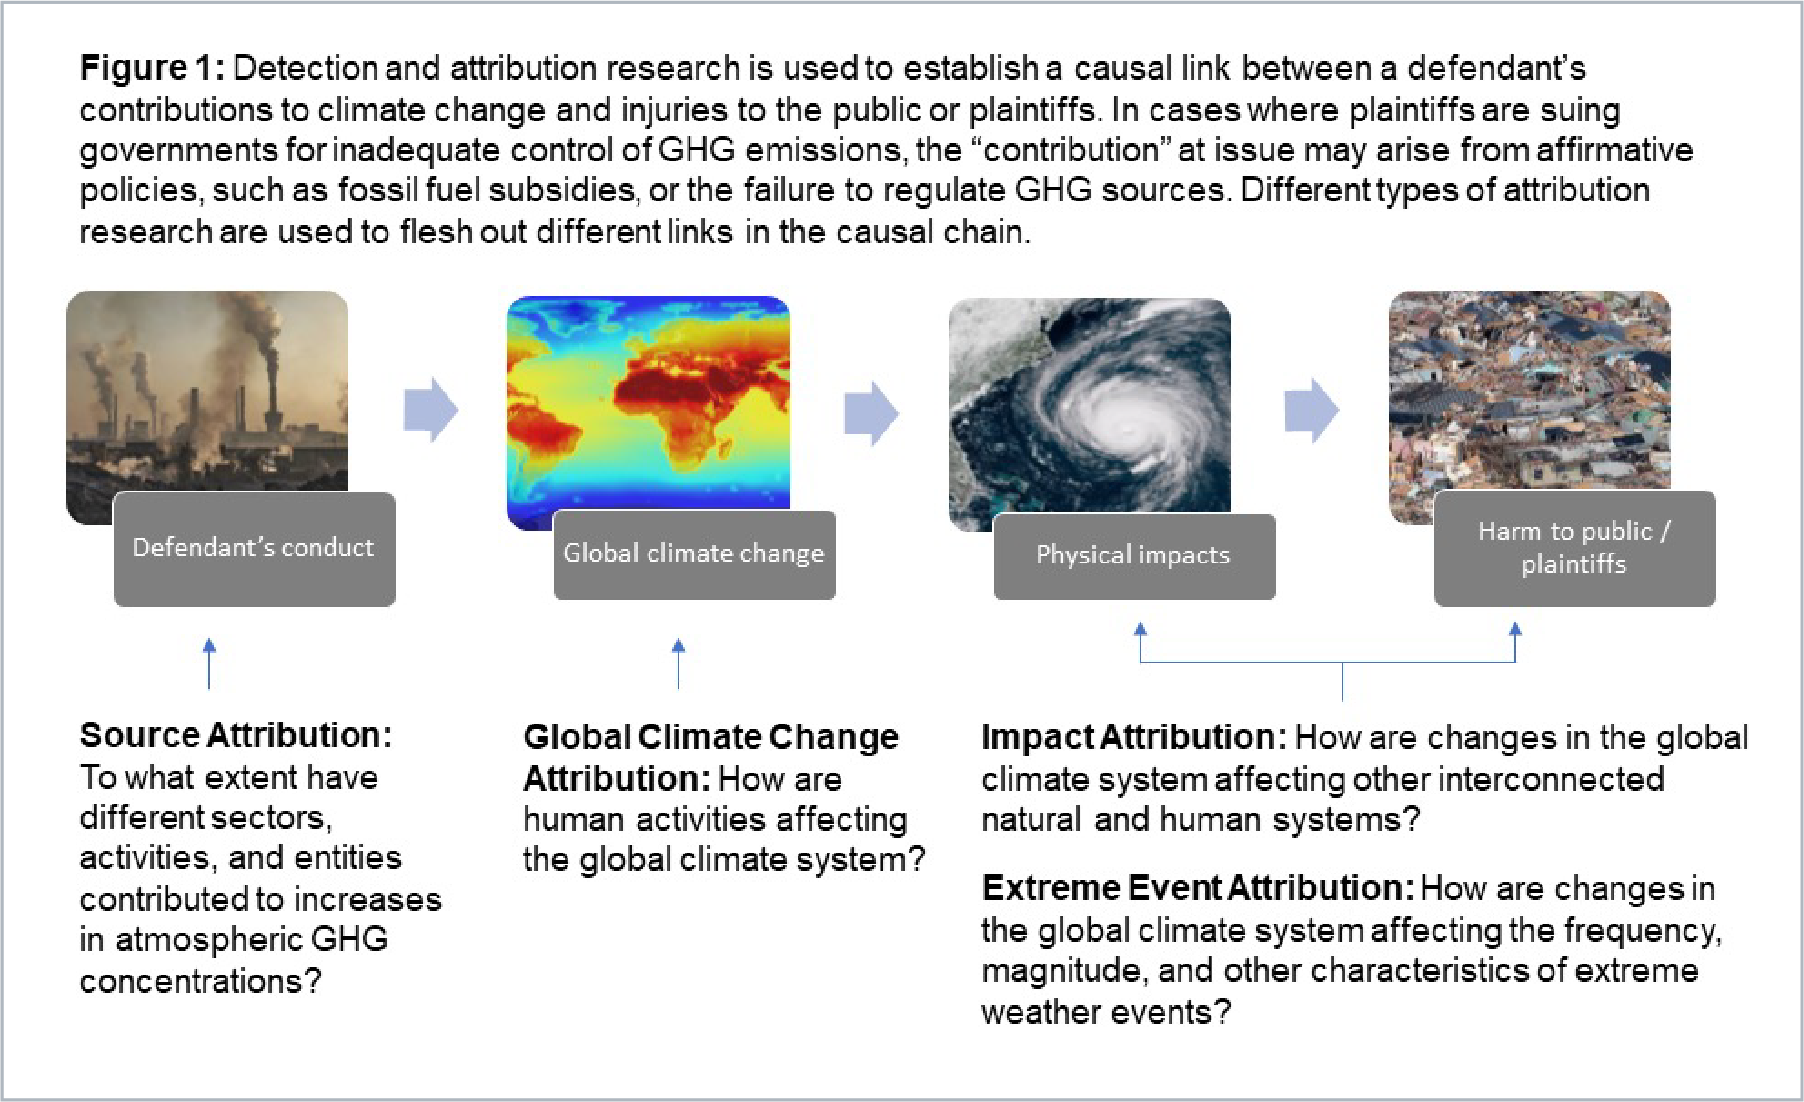 GHG emissions observed changes in the global climate system.